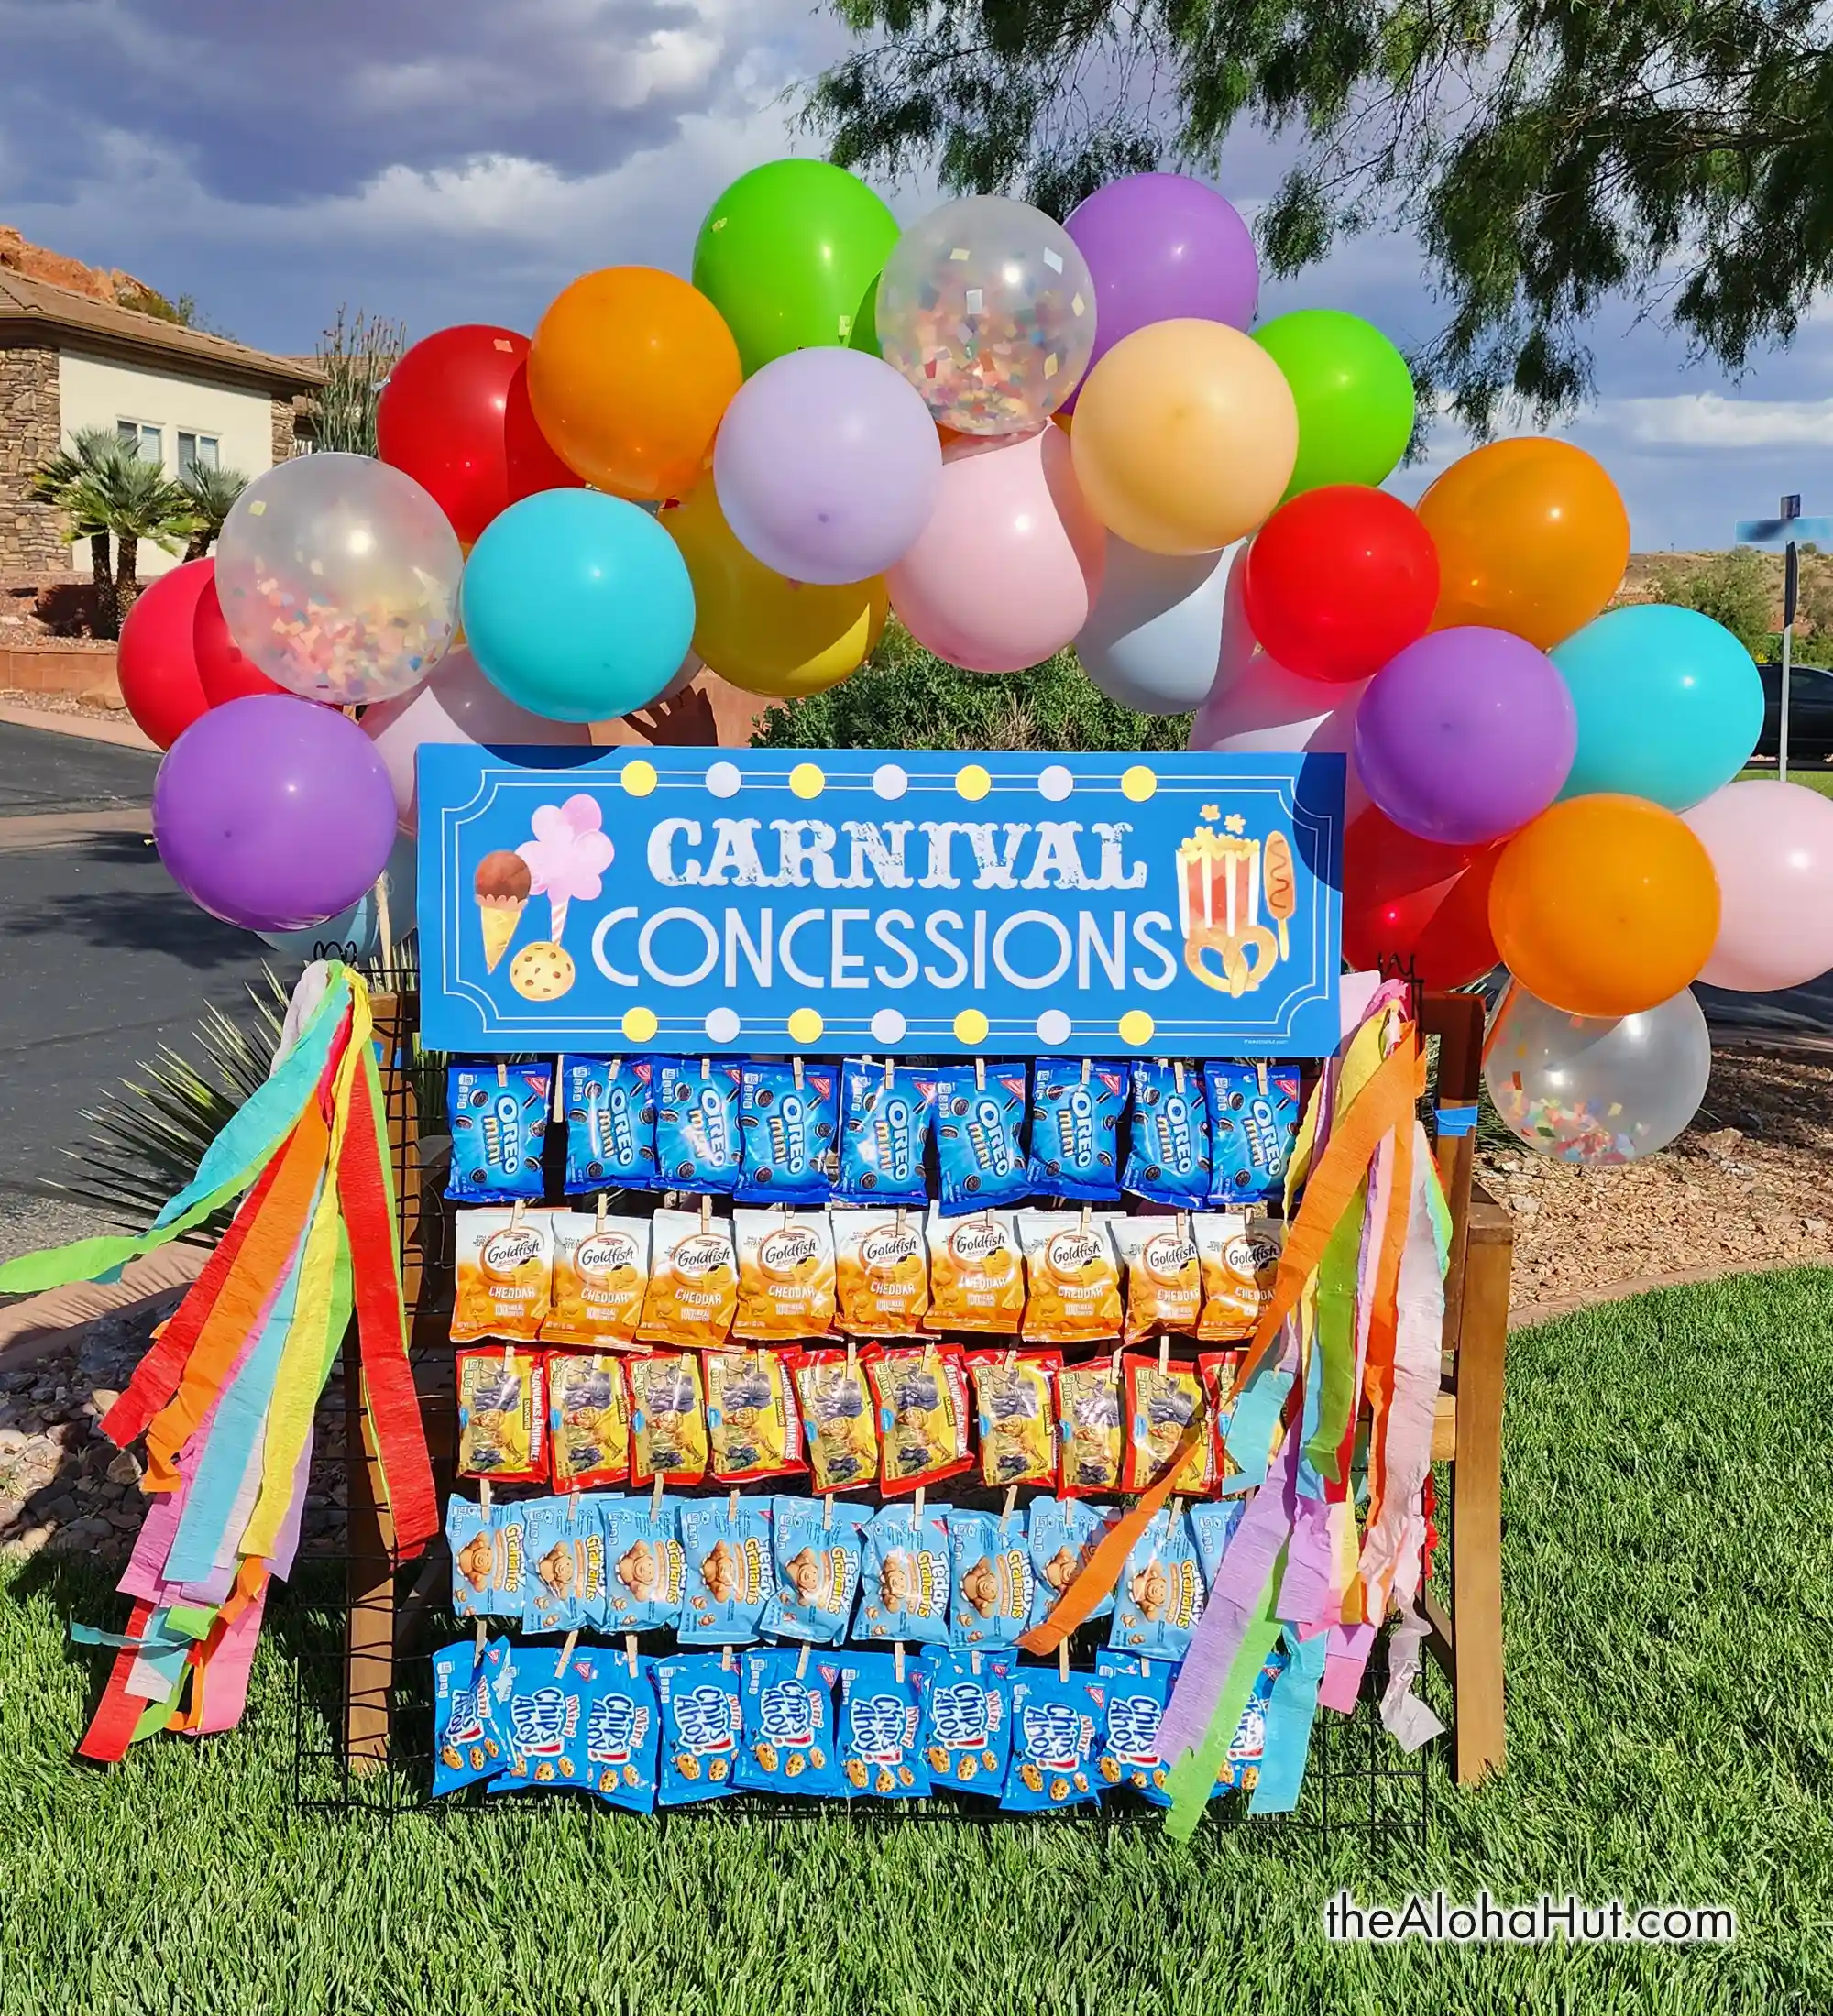 Carnival Party Ideas - Signs - Carnival Concessions_1